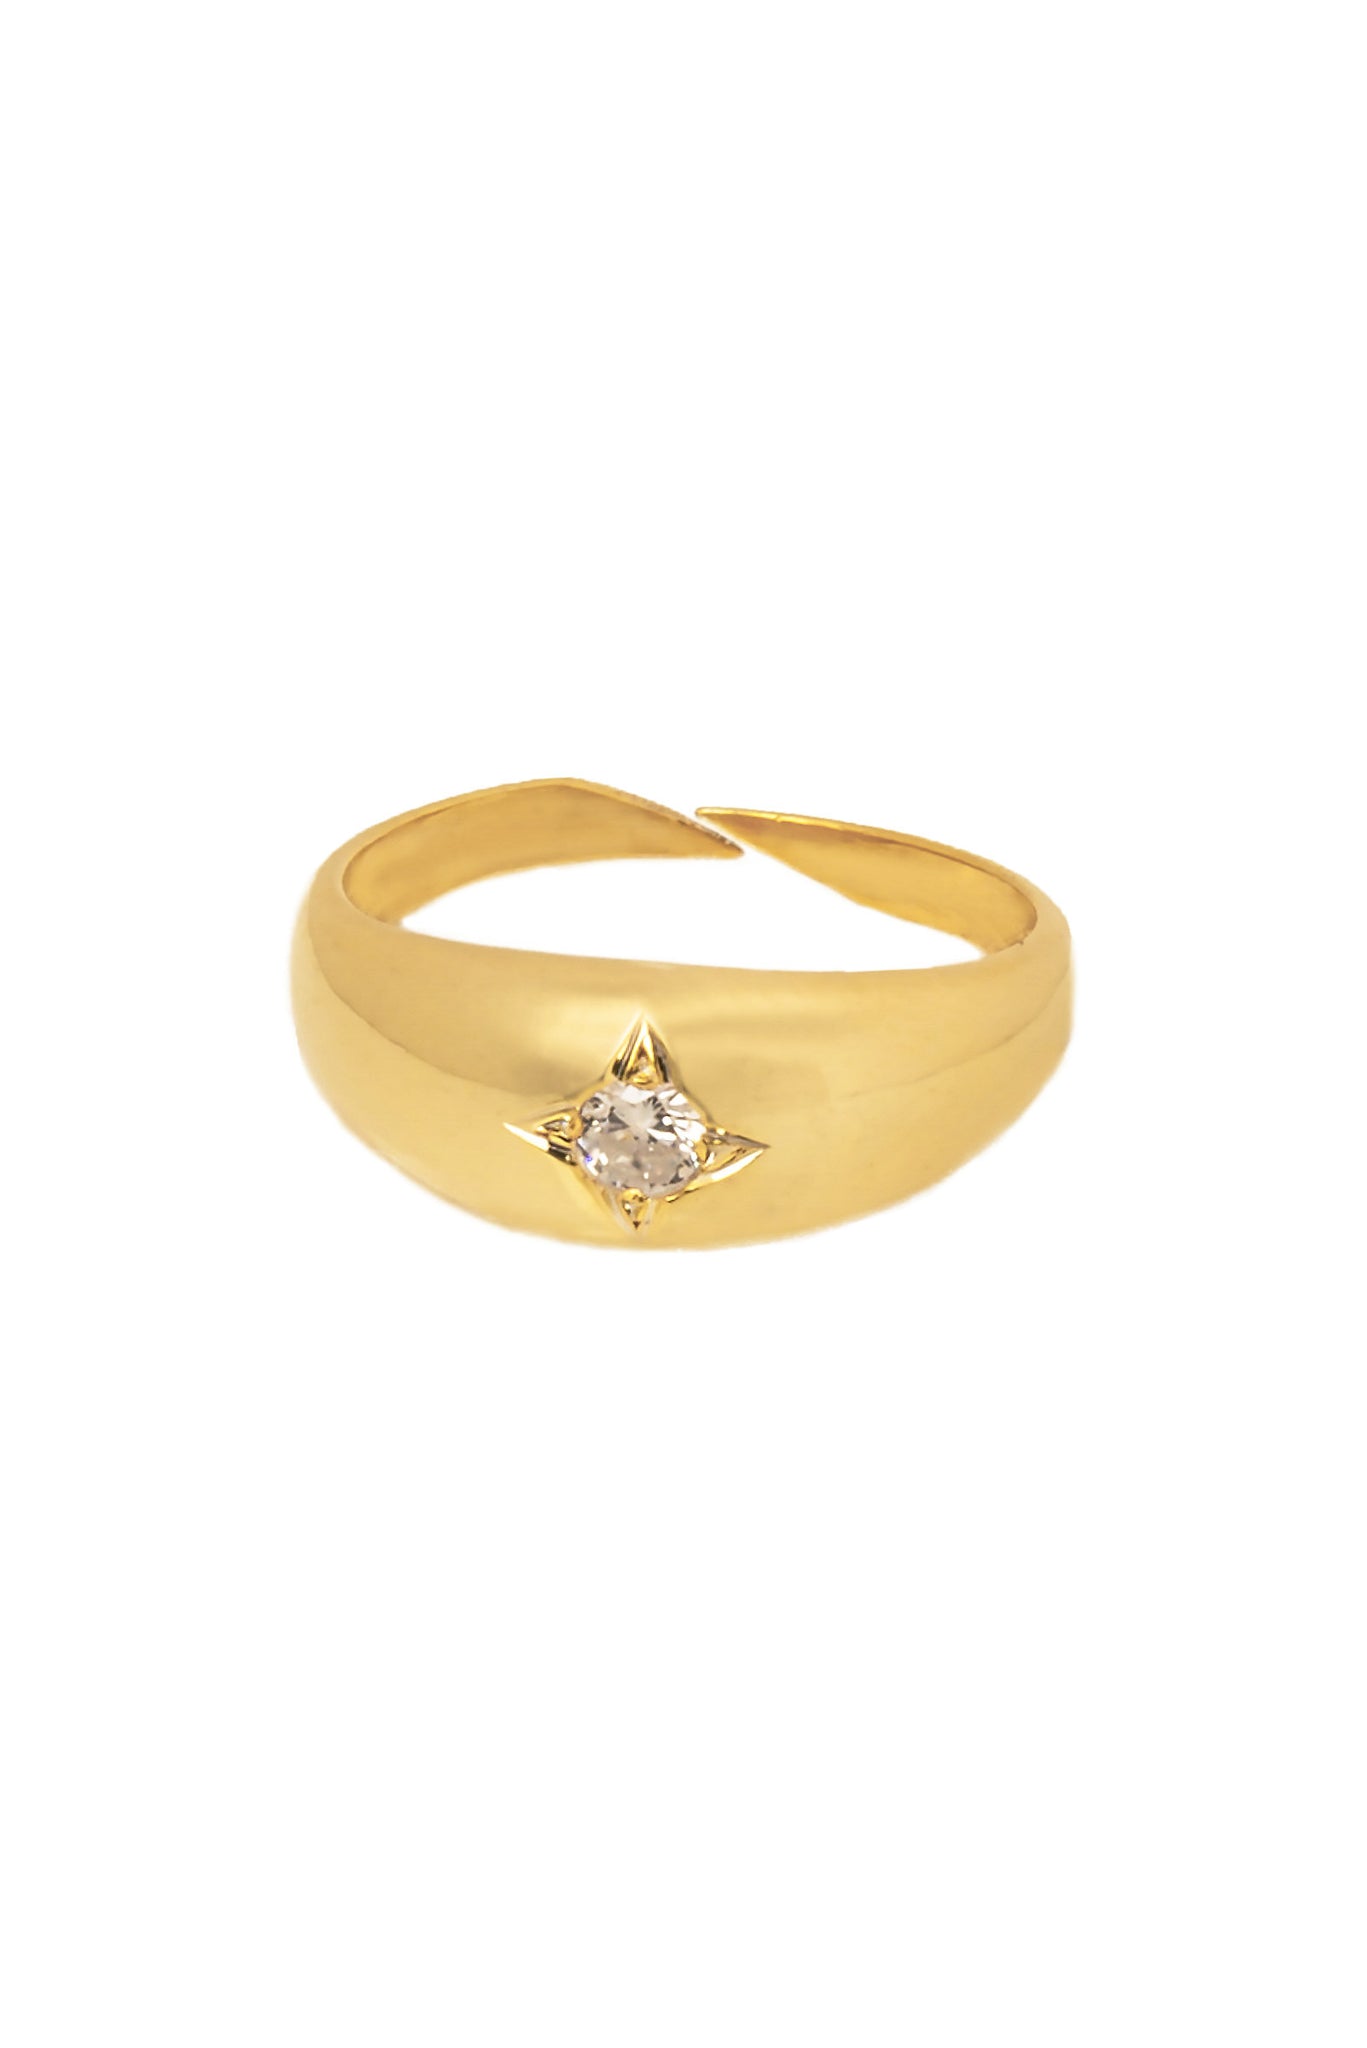 The Starry Night Ring - PRE ORDER